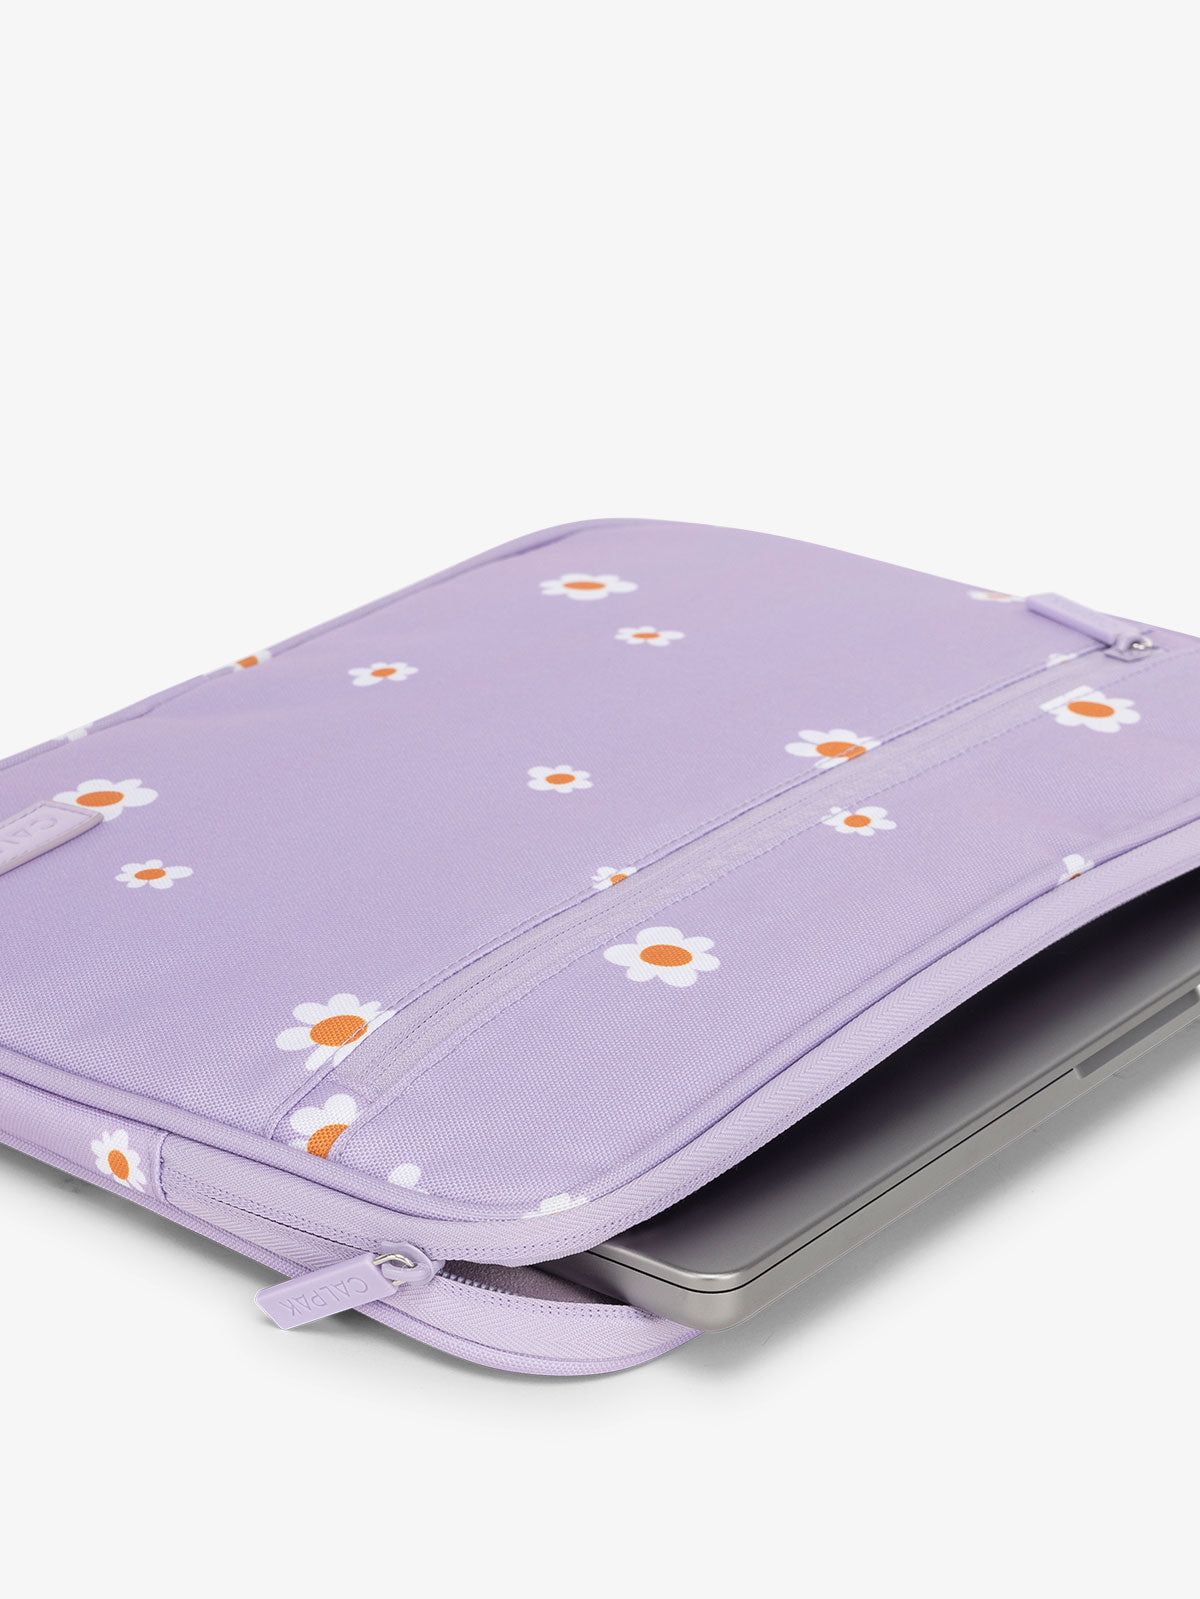 CALPAK 13-14 Inch Laptop sleeve with protective pockets for work in purple orchid fields